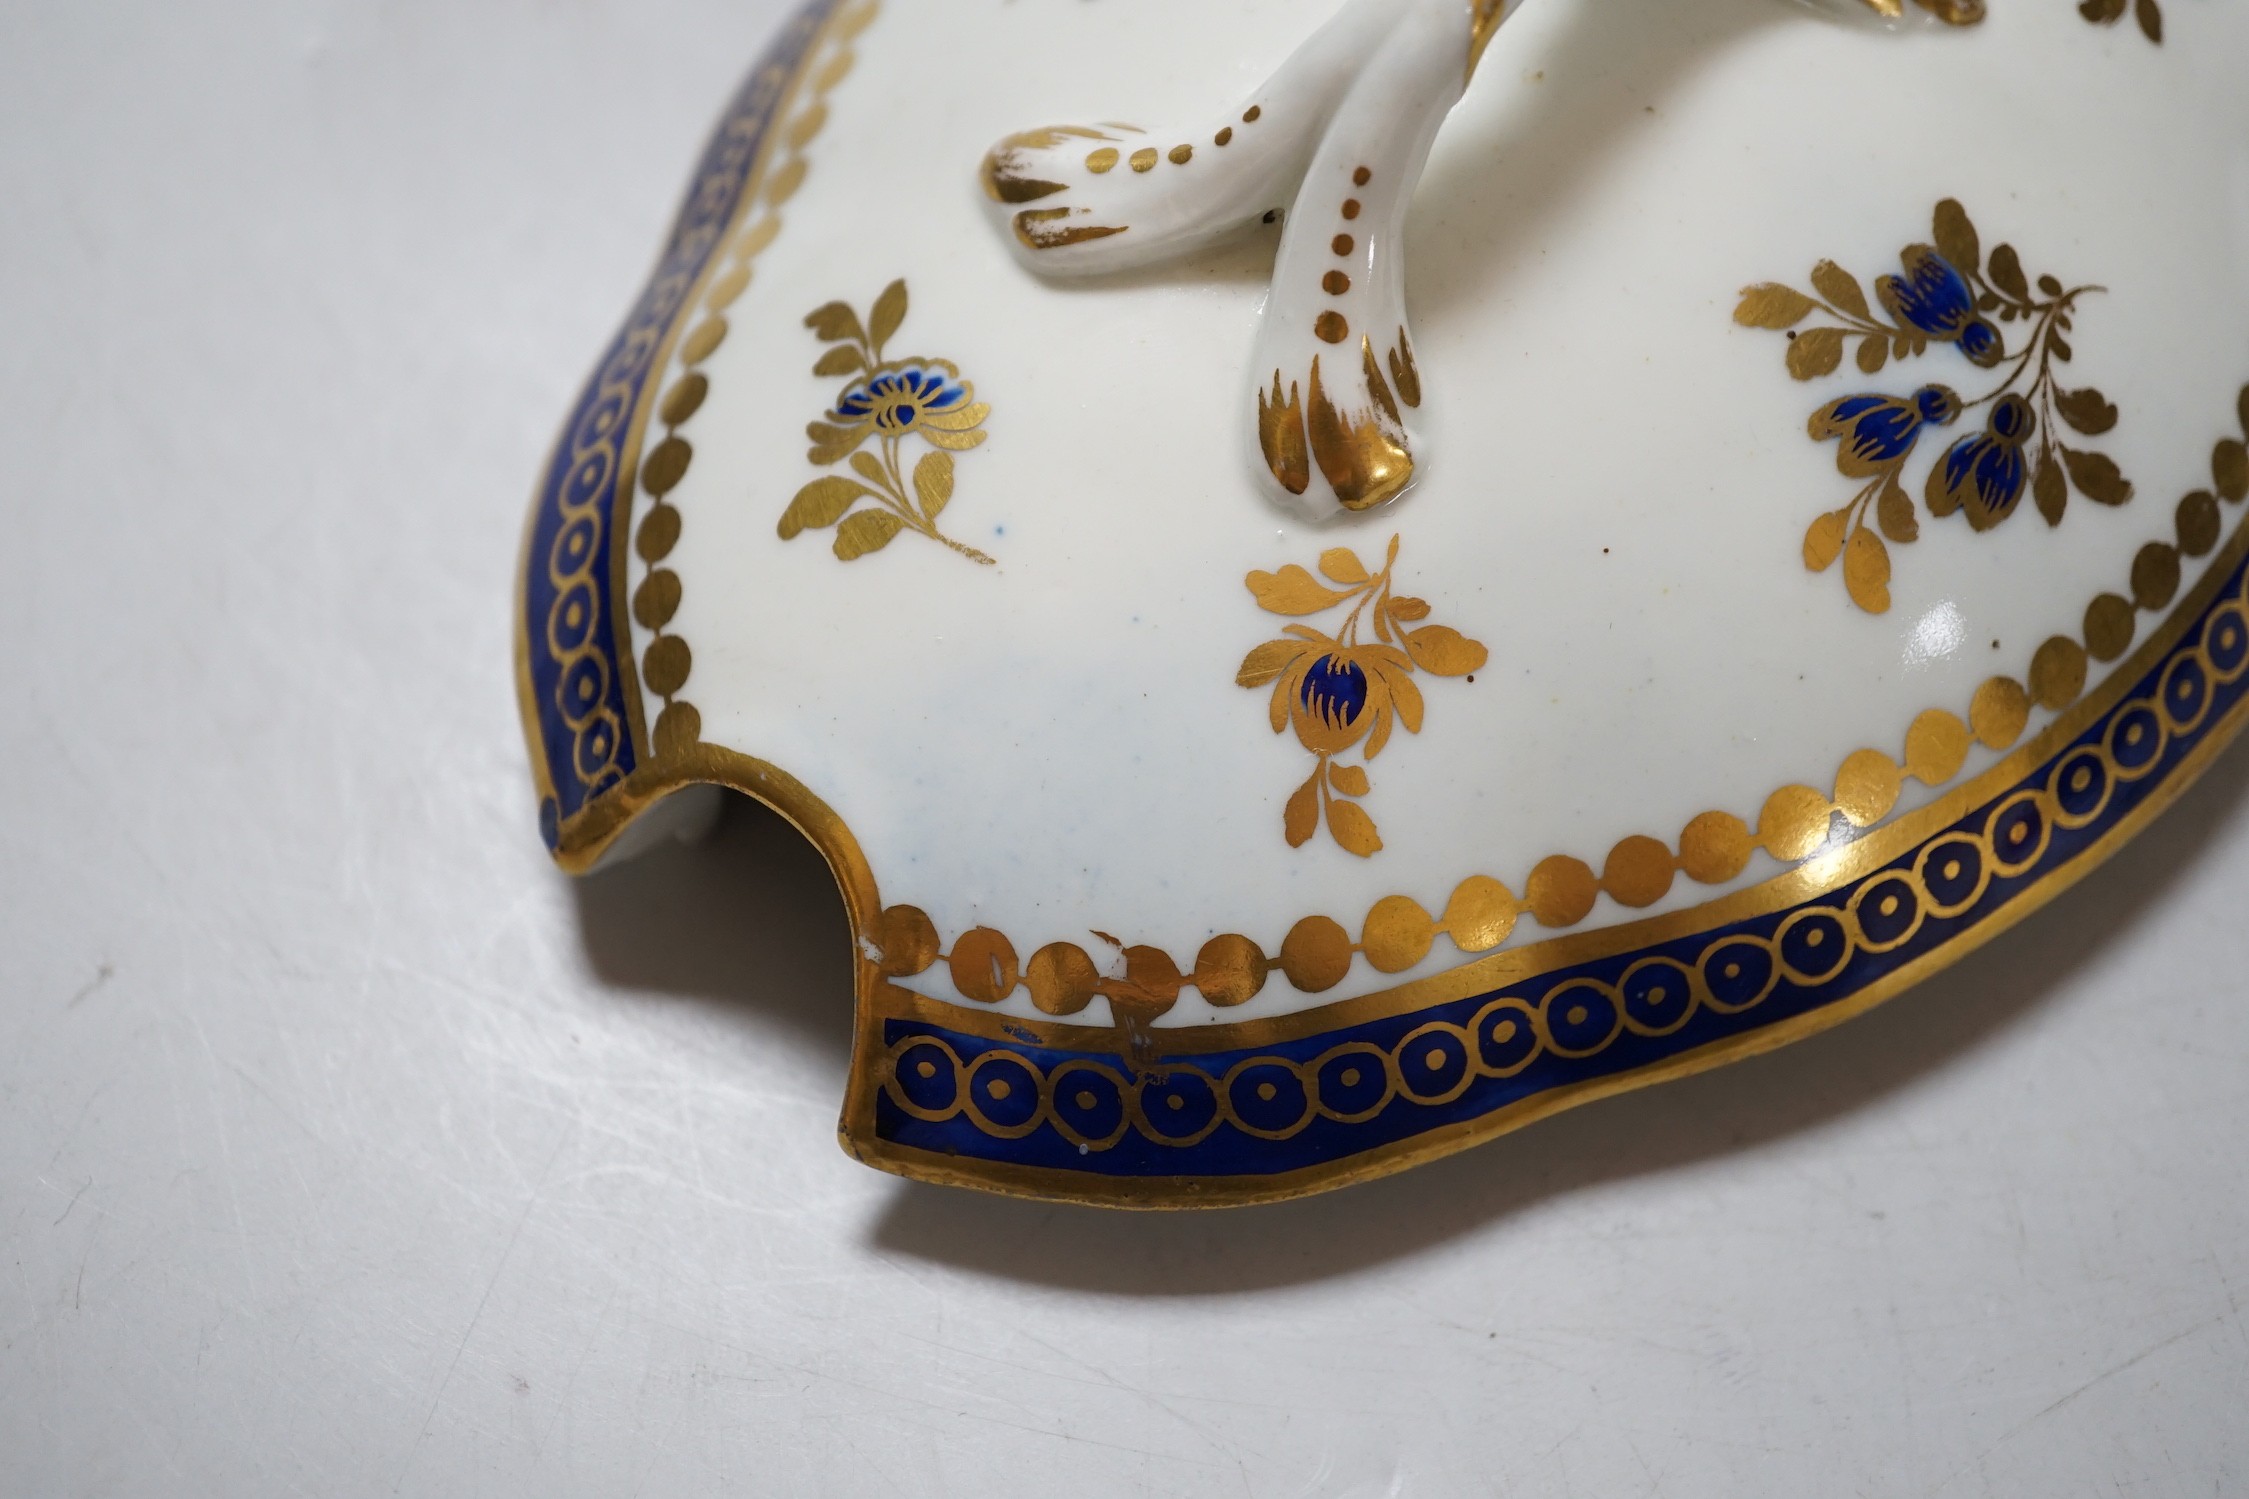 An 18th century Caughley tureen cover and stand with blue and gilt decoration, stand mis-fired to border, S mark to stand and base. 15cm wide